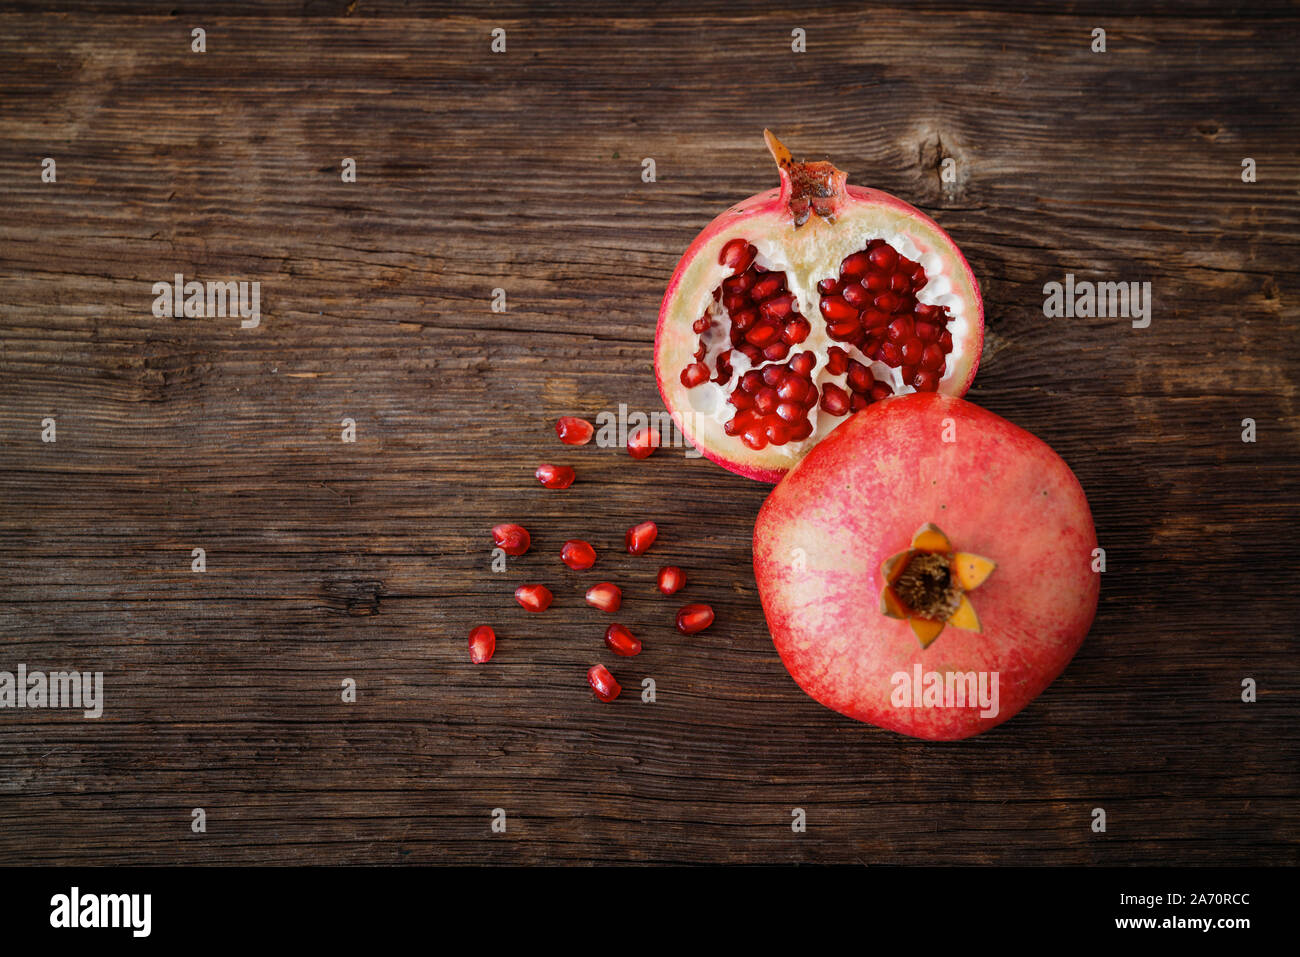 Ripe and fresh pomegranate peeled and ready for eat on wooden beackground. Stock Photo